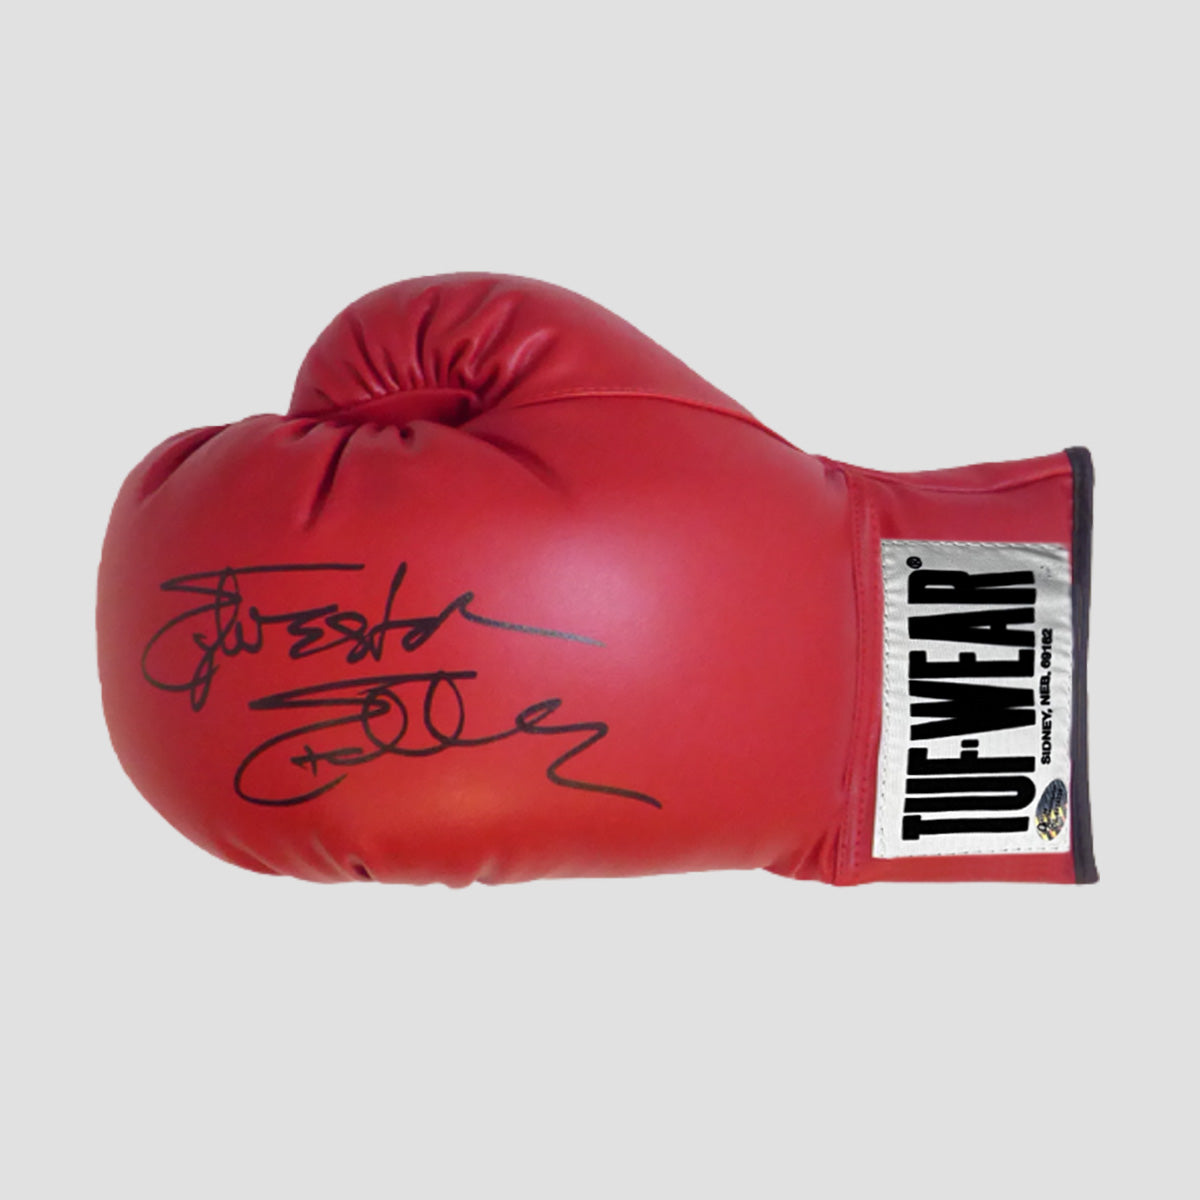 Sylvester Stallone Signed Red Tufwear Boxing Glove - The Bootroom Collection